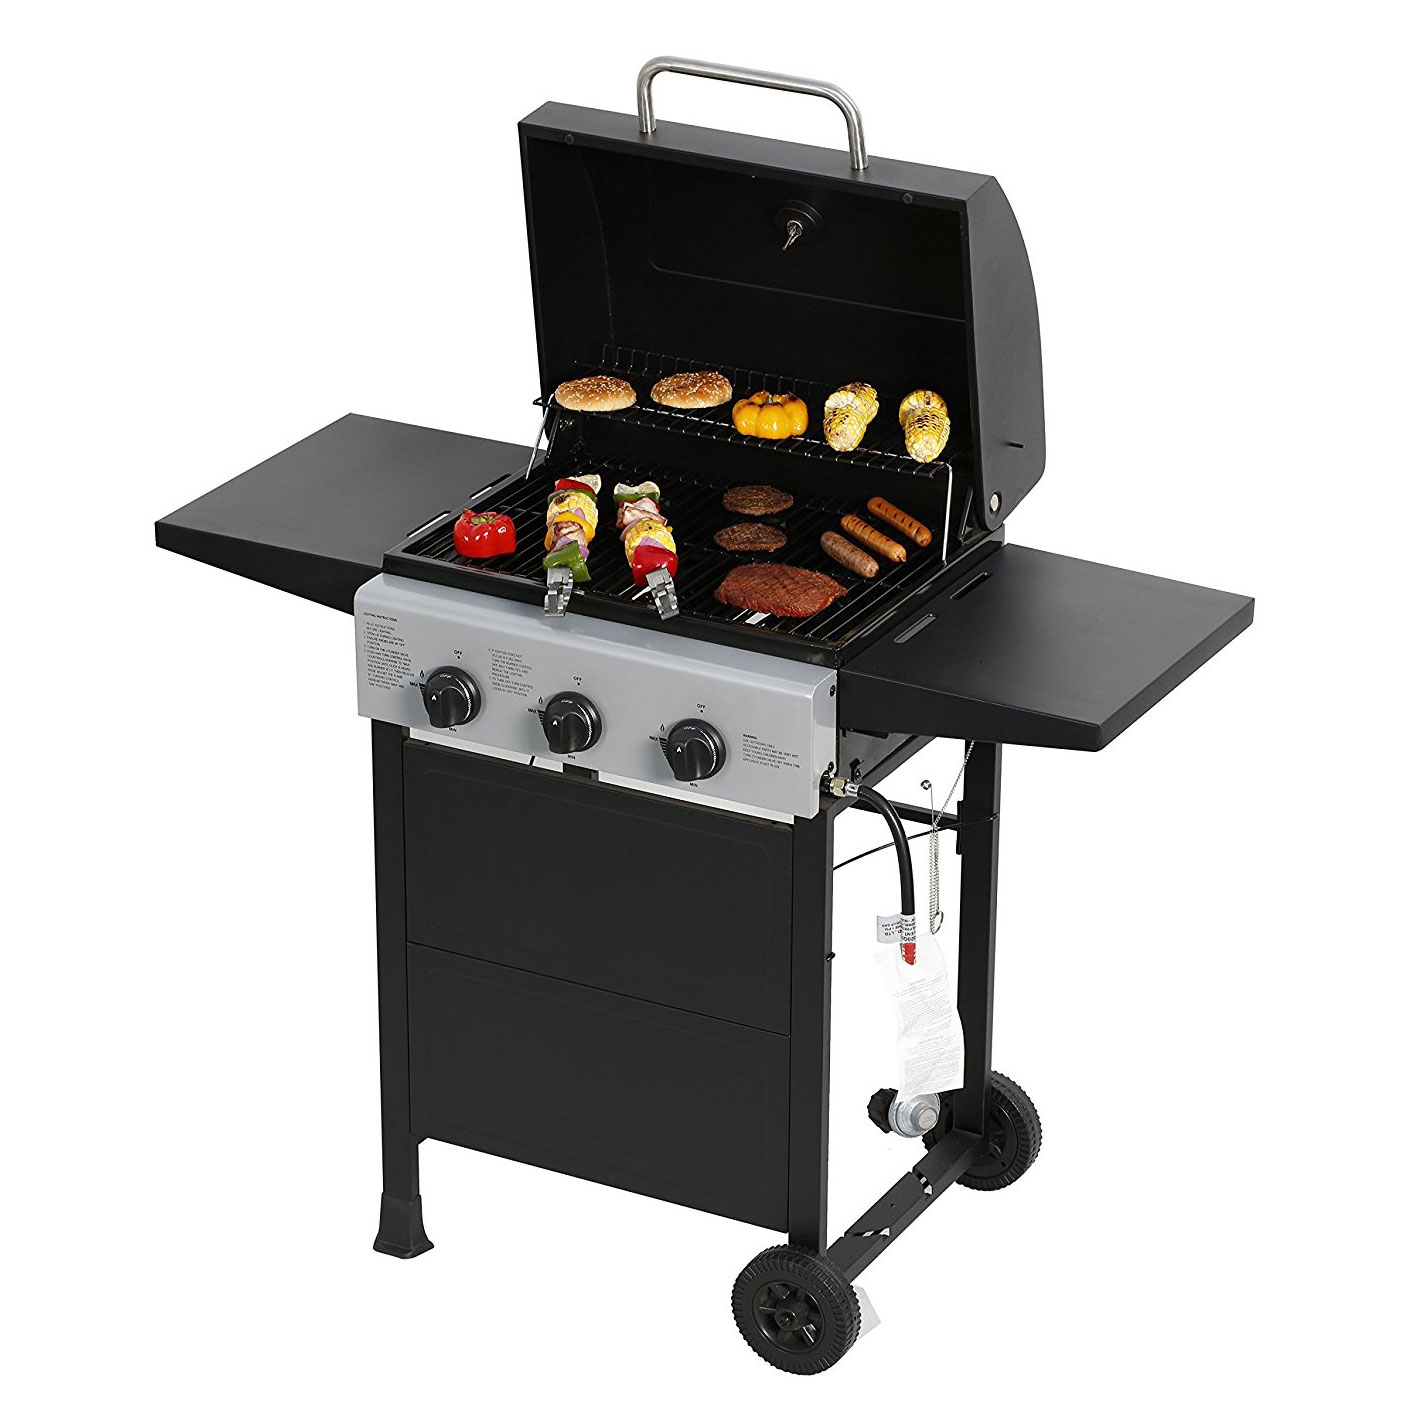 portable bbq gas grill stainless steel main burner barbecue with outdoor side table for two foldable tables offer more space and can folded down when not use tier small wooden